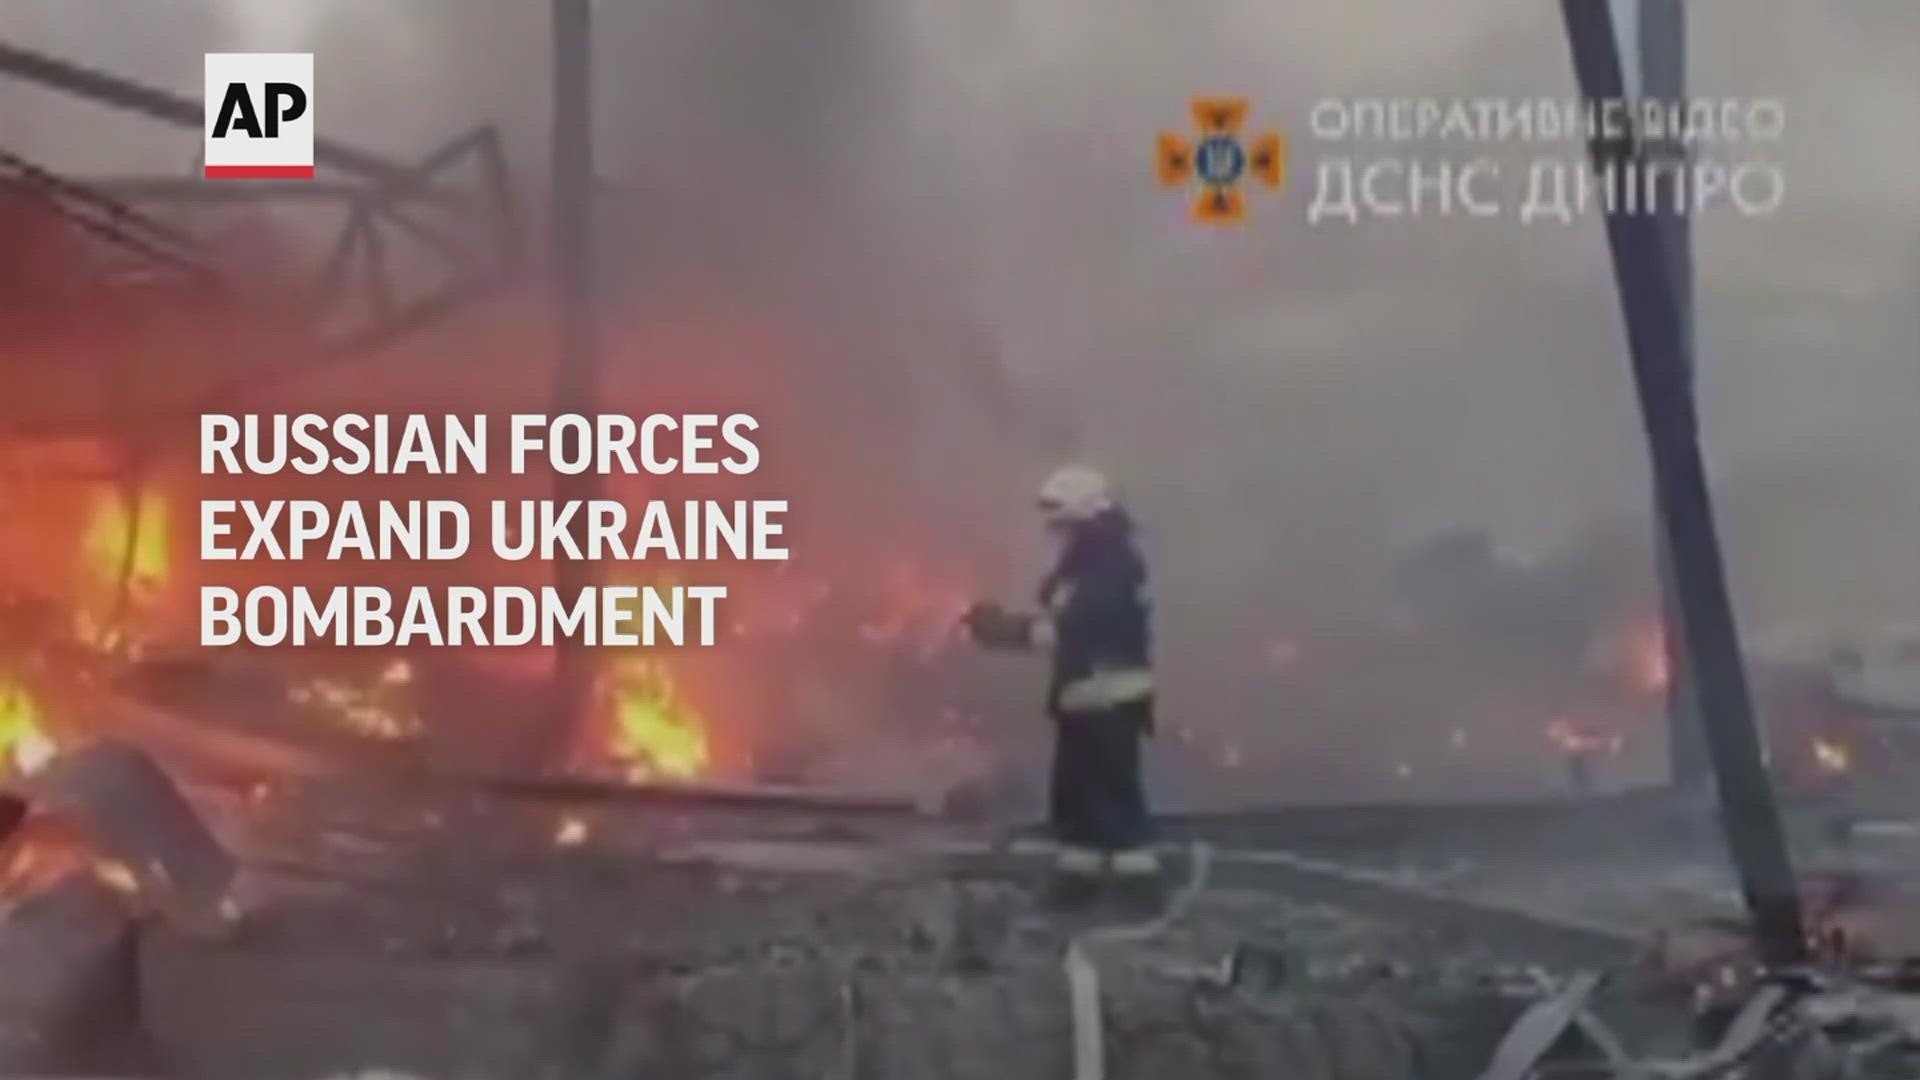 The Russian military heavily targeted the central city of Dnipro, killing at least one person.